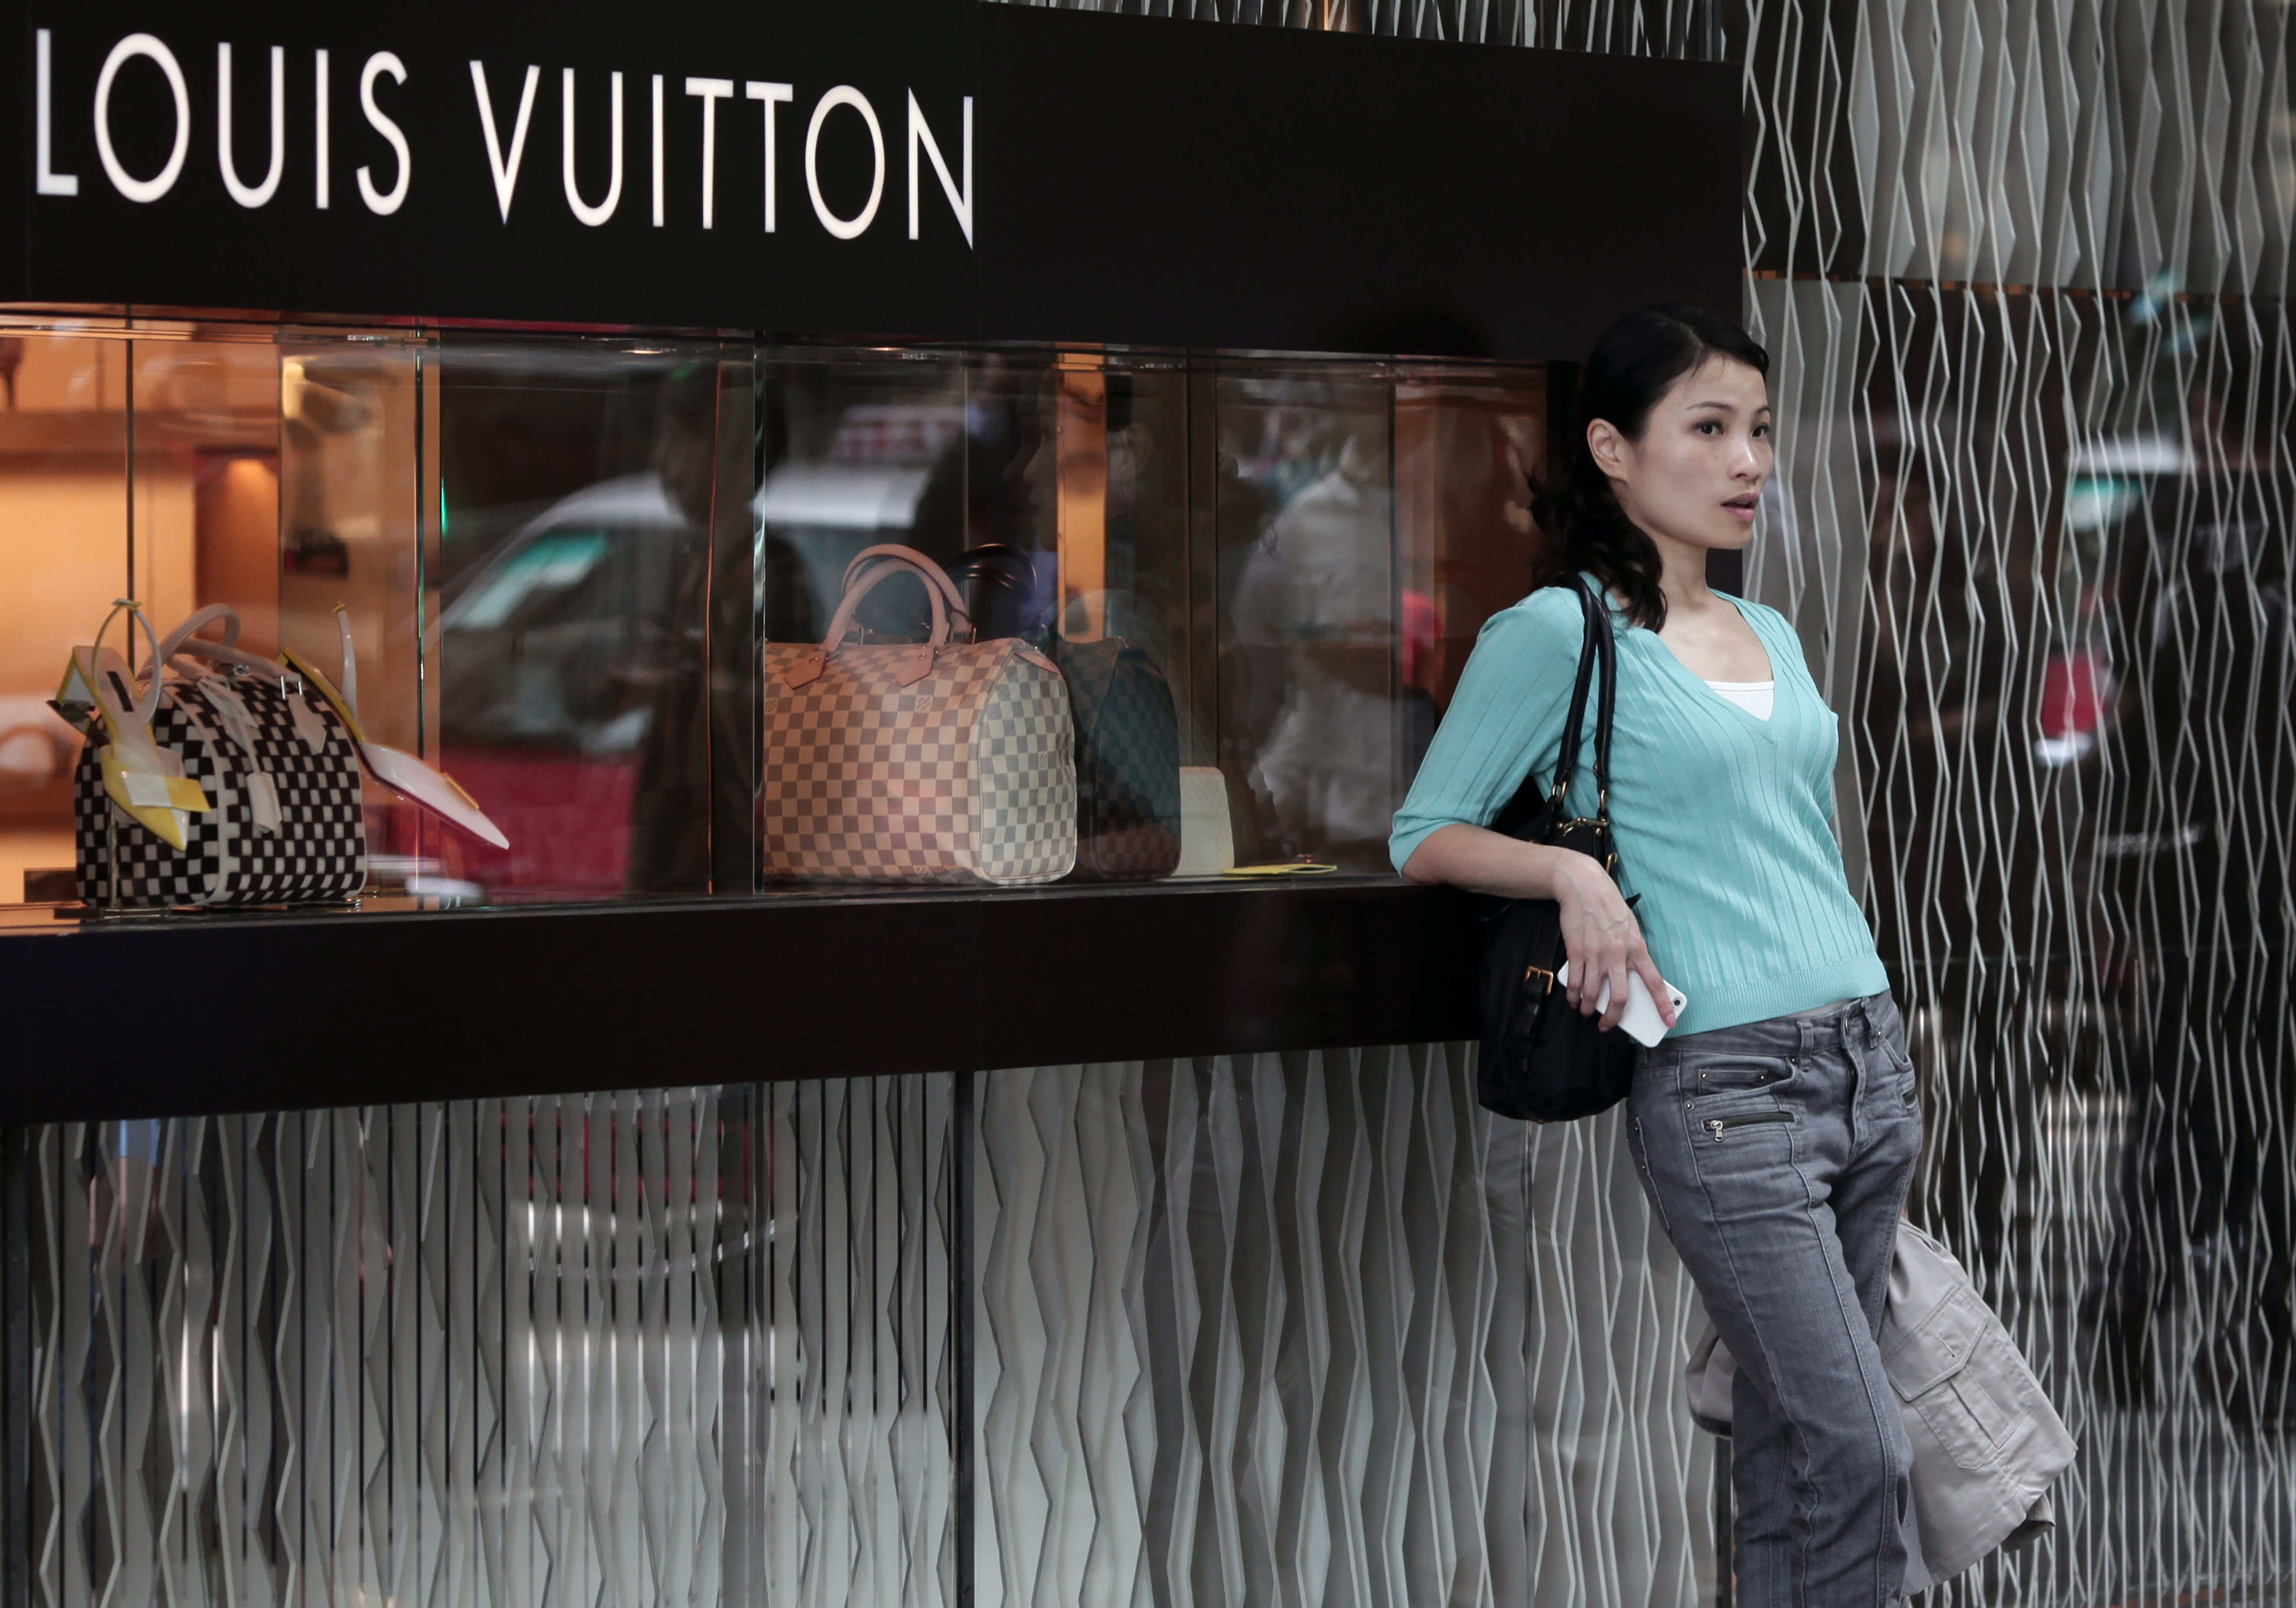 Buy Louis Vuitton Goods Now, Pay Later - Luxe BNPL